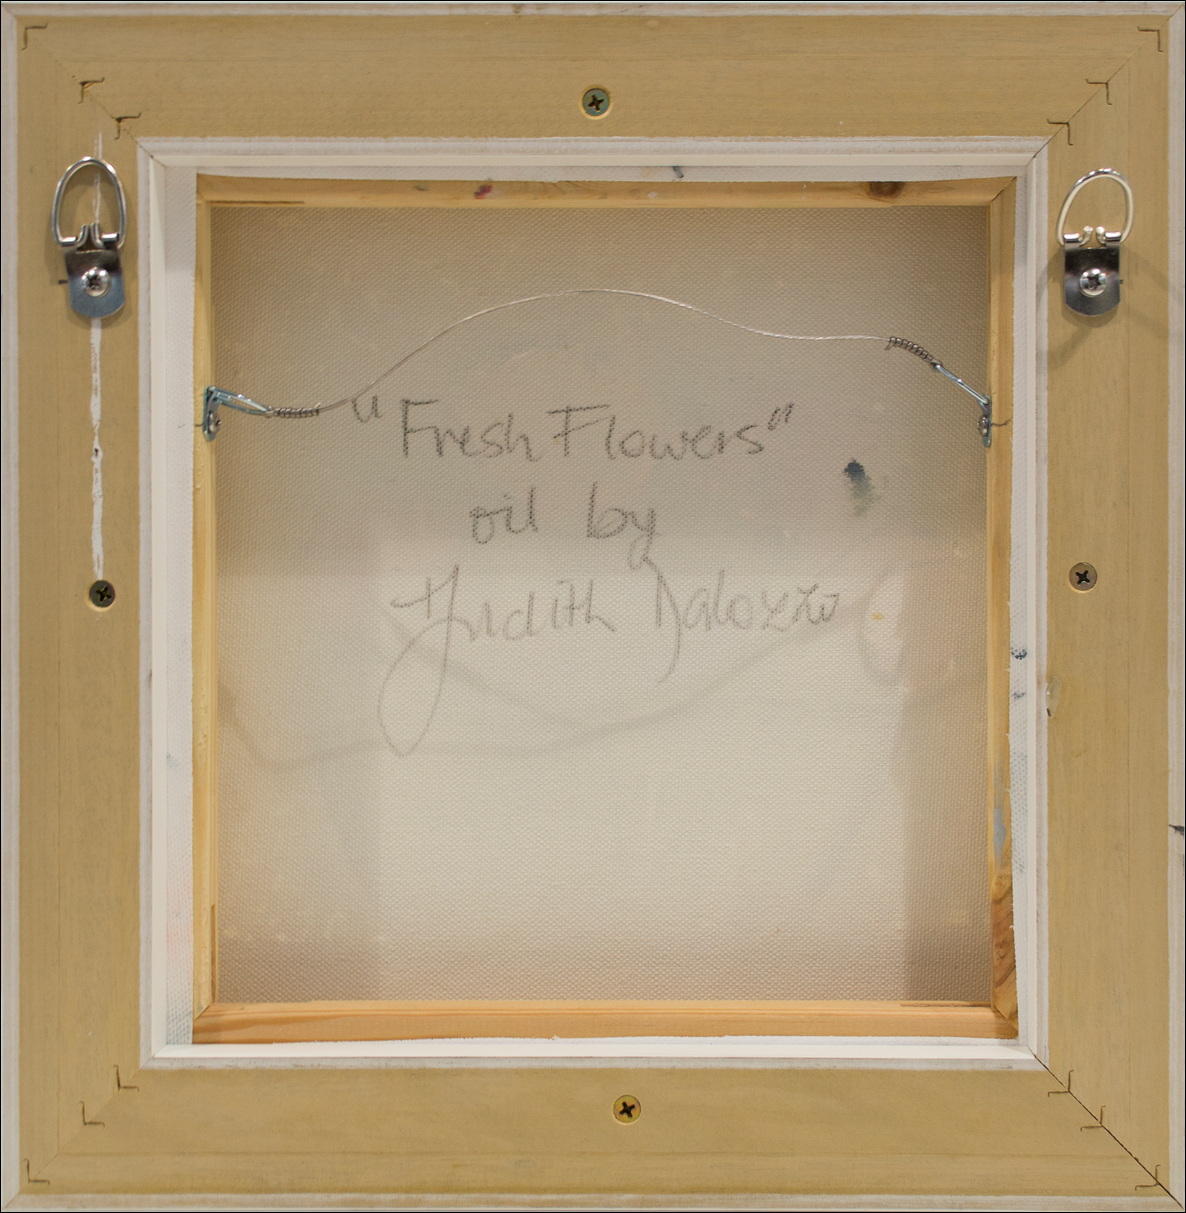 Framed Back View Of Still Life Painting "Fresh Flowers" By Judith Dalozzo